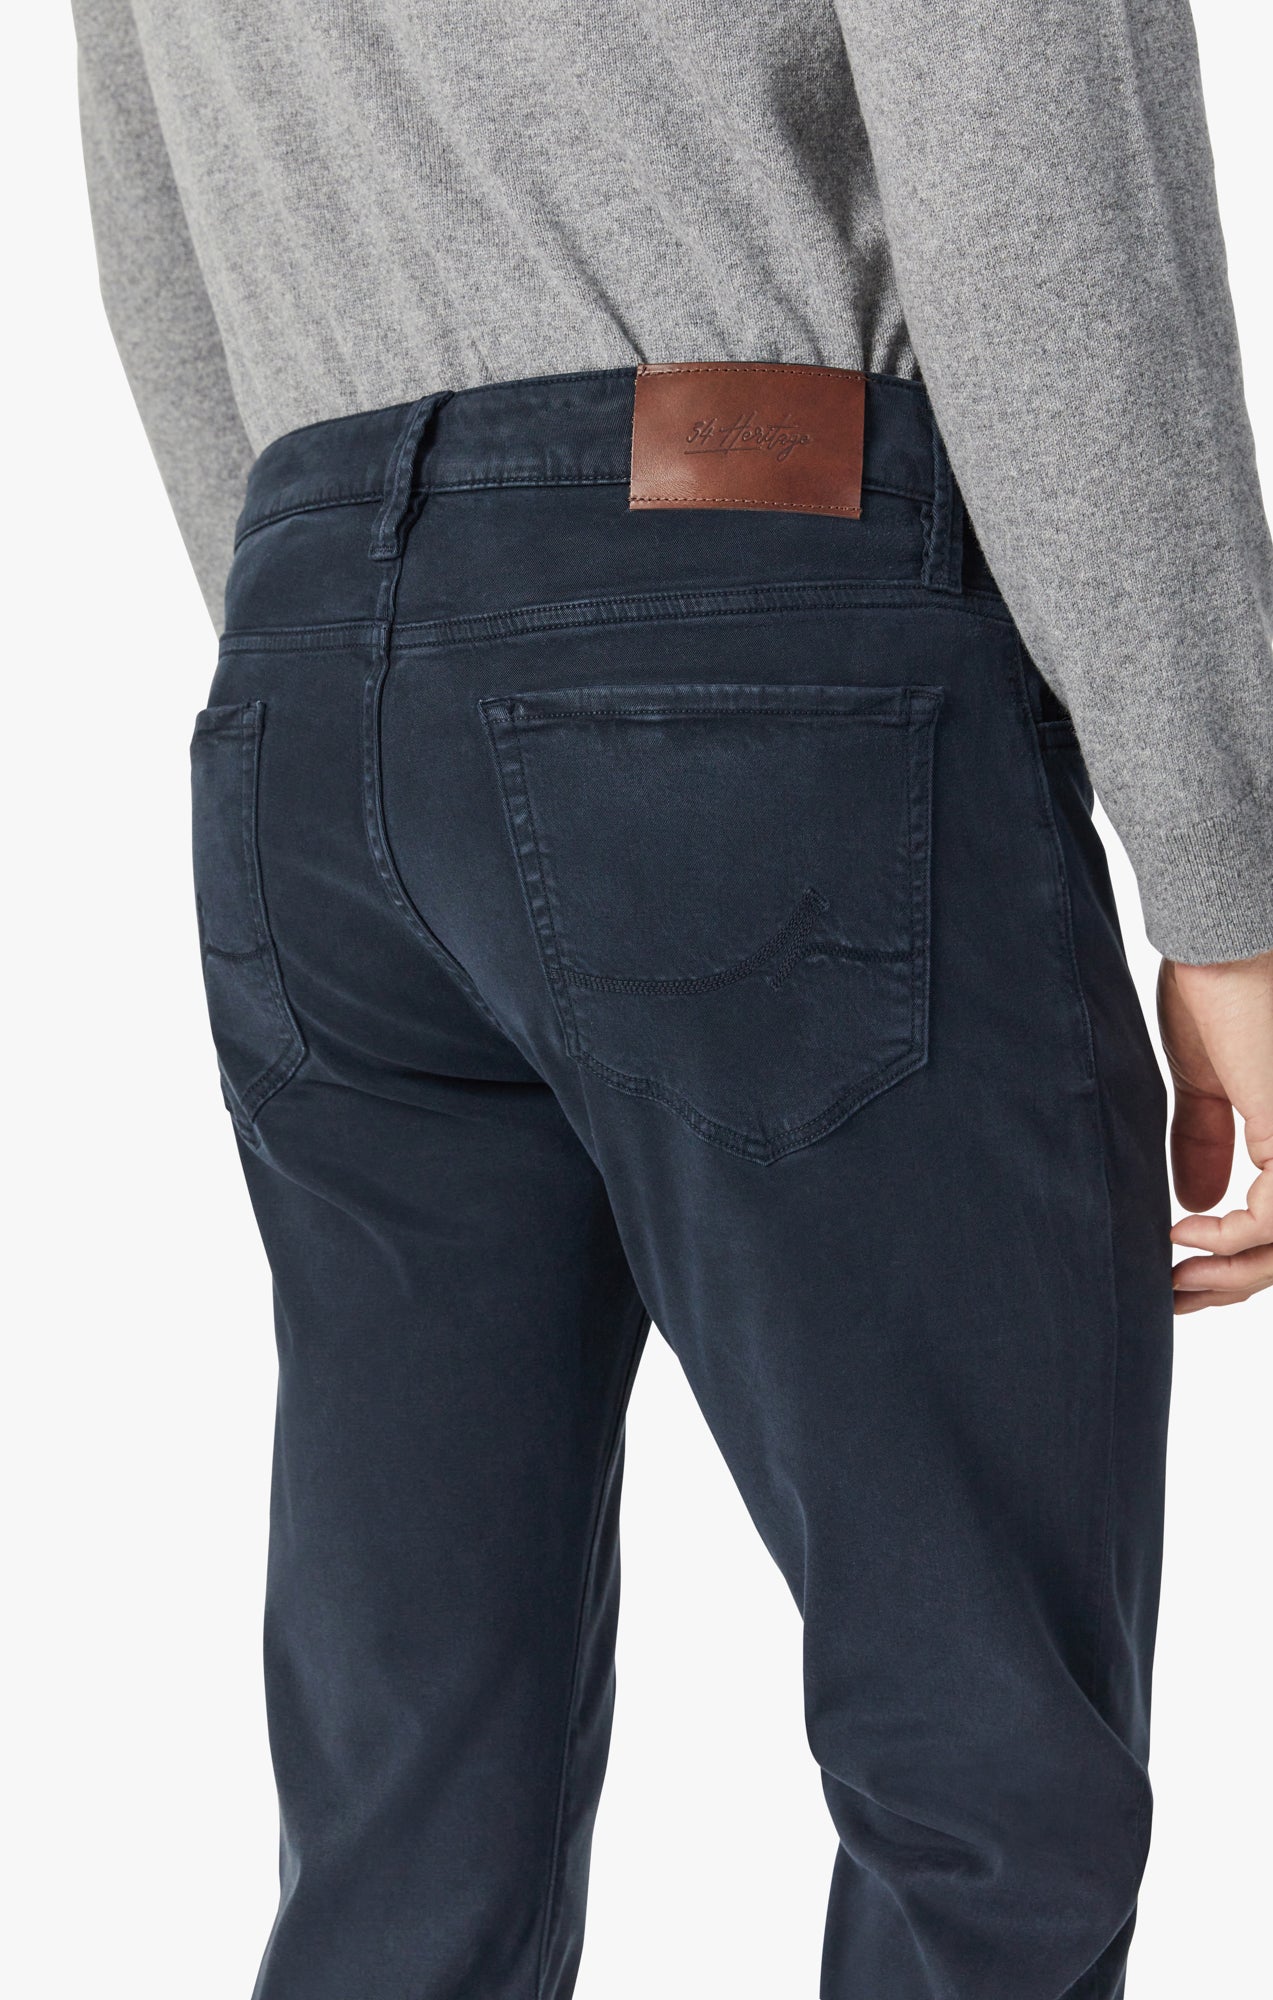 Cool Tapered Leg Pants in Navy Brushed Twill Image 5